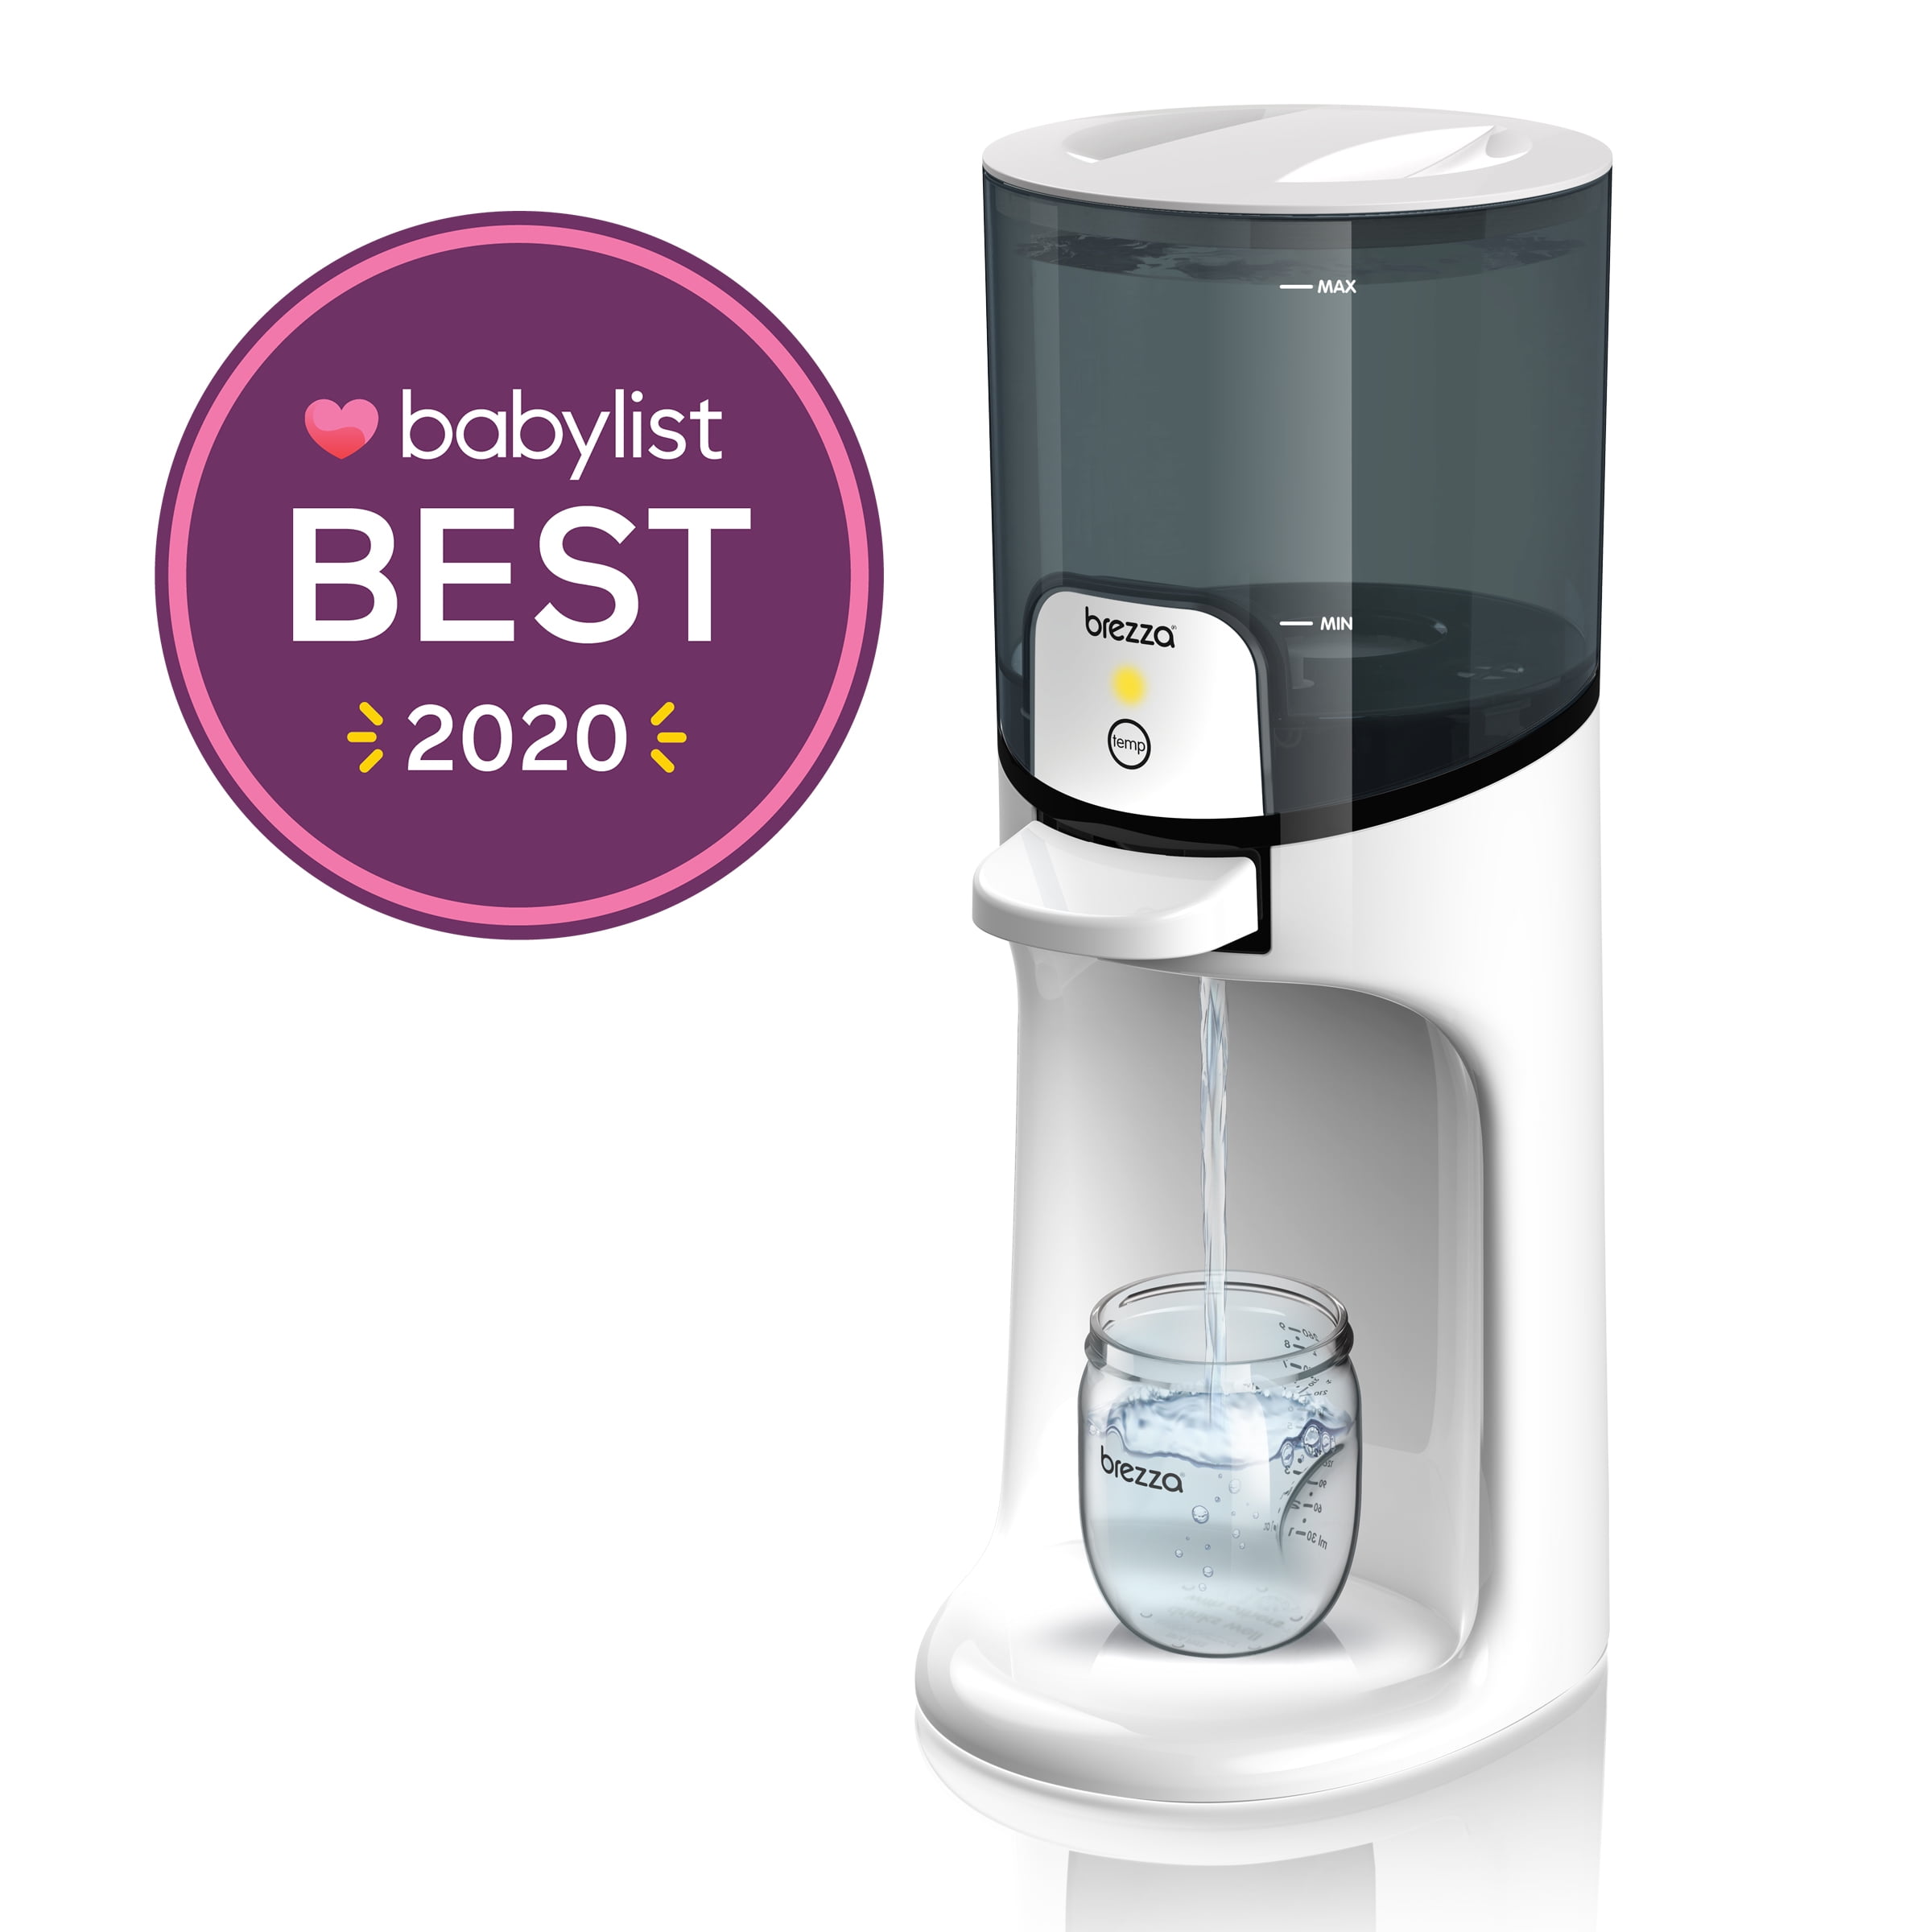 Baby Brezza Instant Warmer  Instantly Dispense Warm Water at Perfect Baby Bottle Temperature - Traditional Baby Bottle Warmer Replacement - Fast Baby Formula Bottles 24/7  3 Temperatures